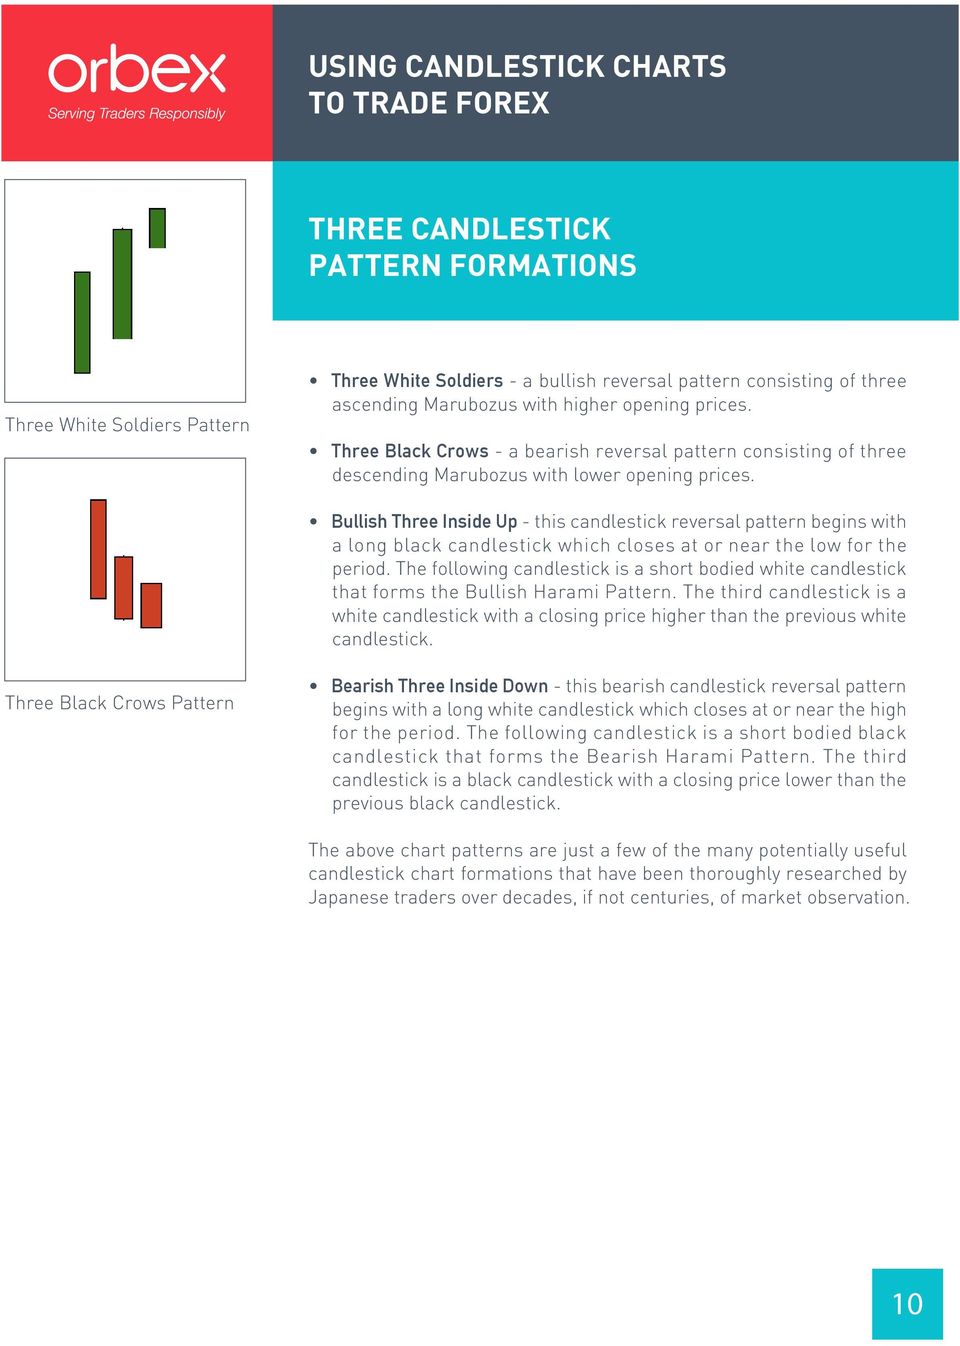 Bullish Three Inside Up - this candlestick reversal pattern begins with a long black candlestick which closes at or near the low for the period.